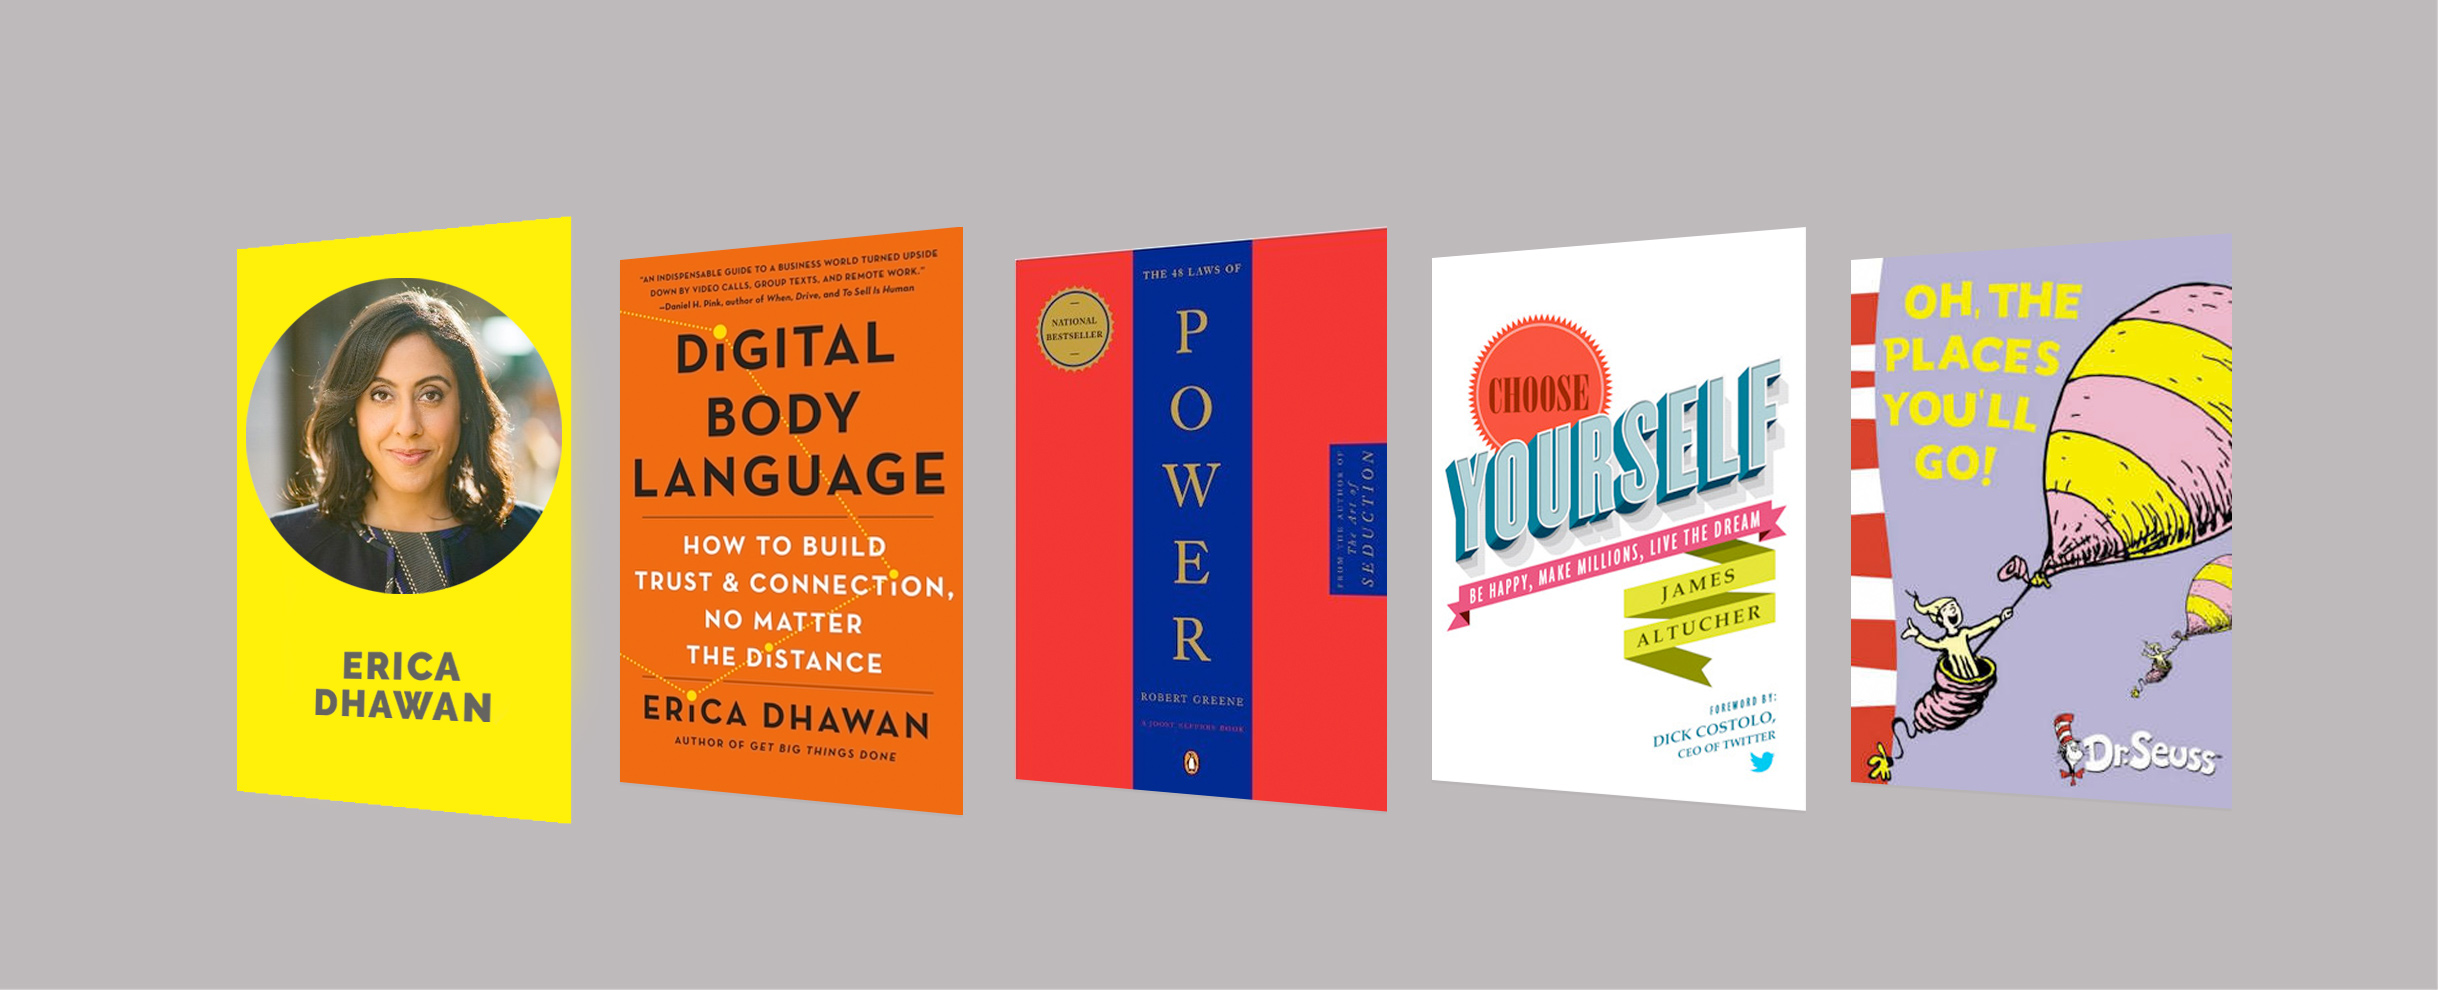 Interview with Erica Dhawan, author of Digital Body Language: How to Build Trust and Connection, No Matter the Distance